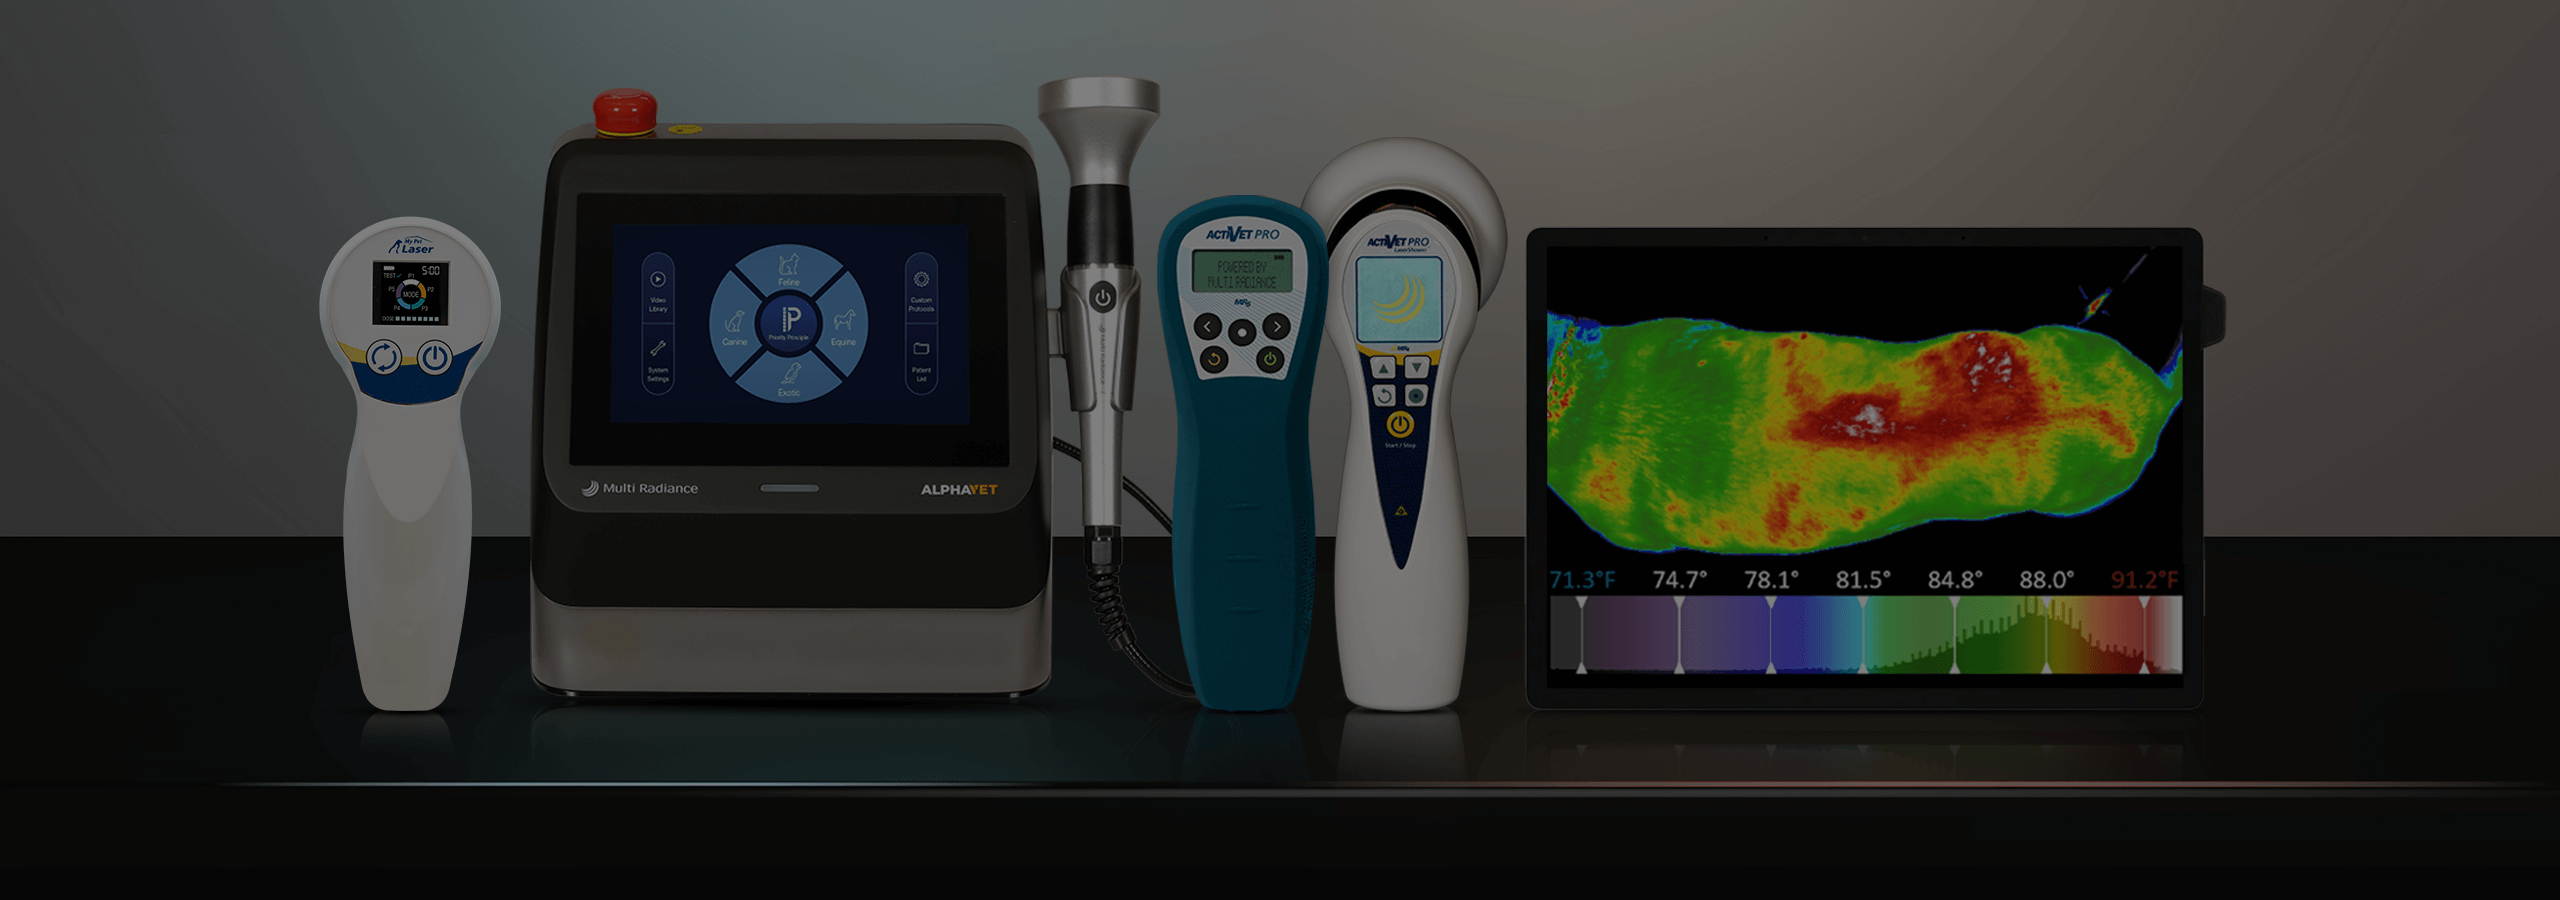 Multi Radiance Veterinary Partners with Digatherm Thermal Imaging